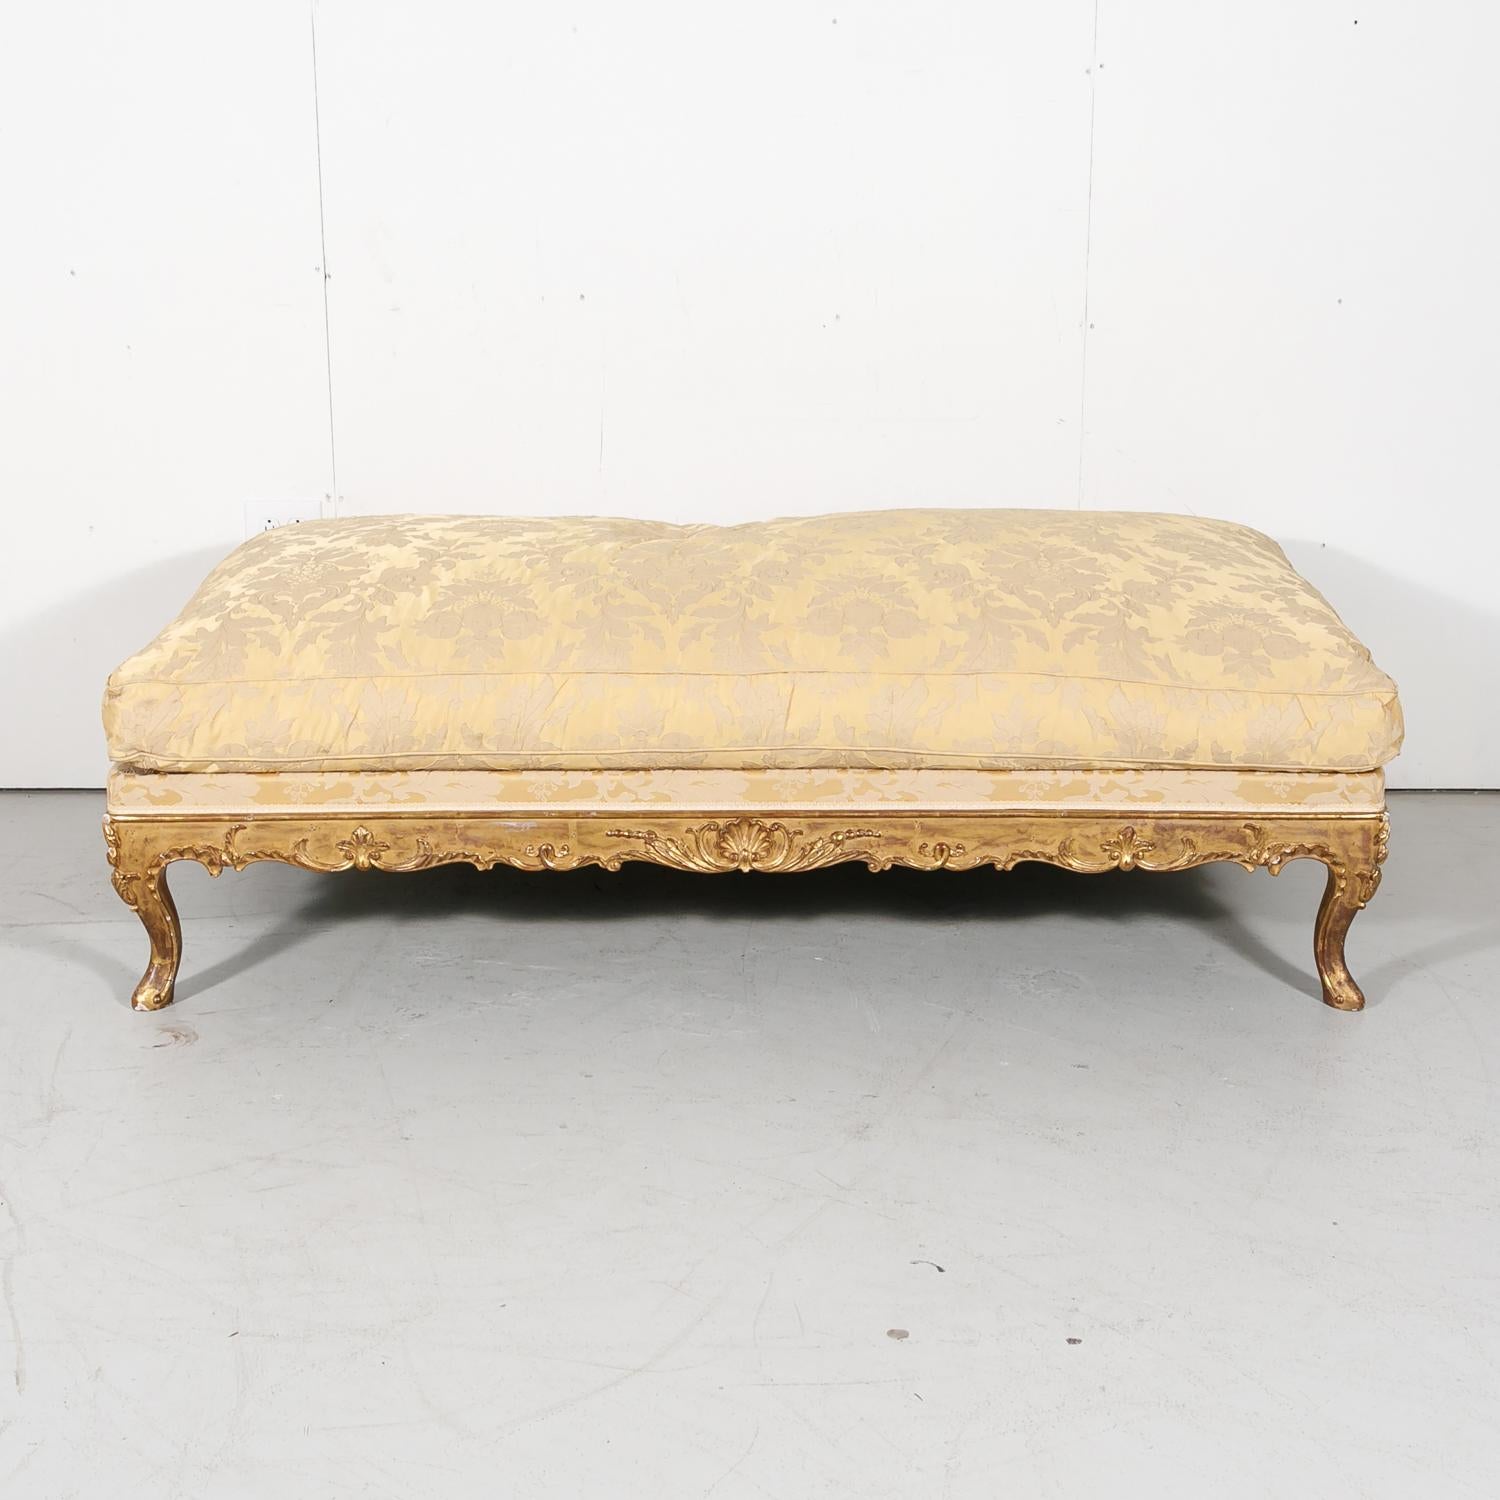 A fine 19th century Louis XV style giltwood bench having a loose down cushion upholstered in a beautiful silk damask appliqué atop an elaborately carved upholstered frame with floral and shell motifs on all four sides, 1870s. Raised on short